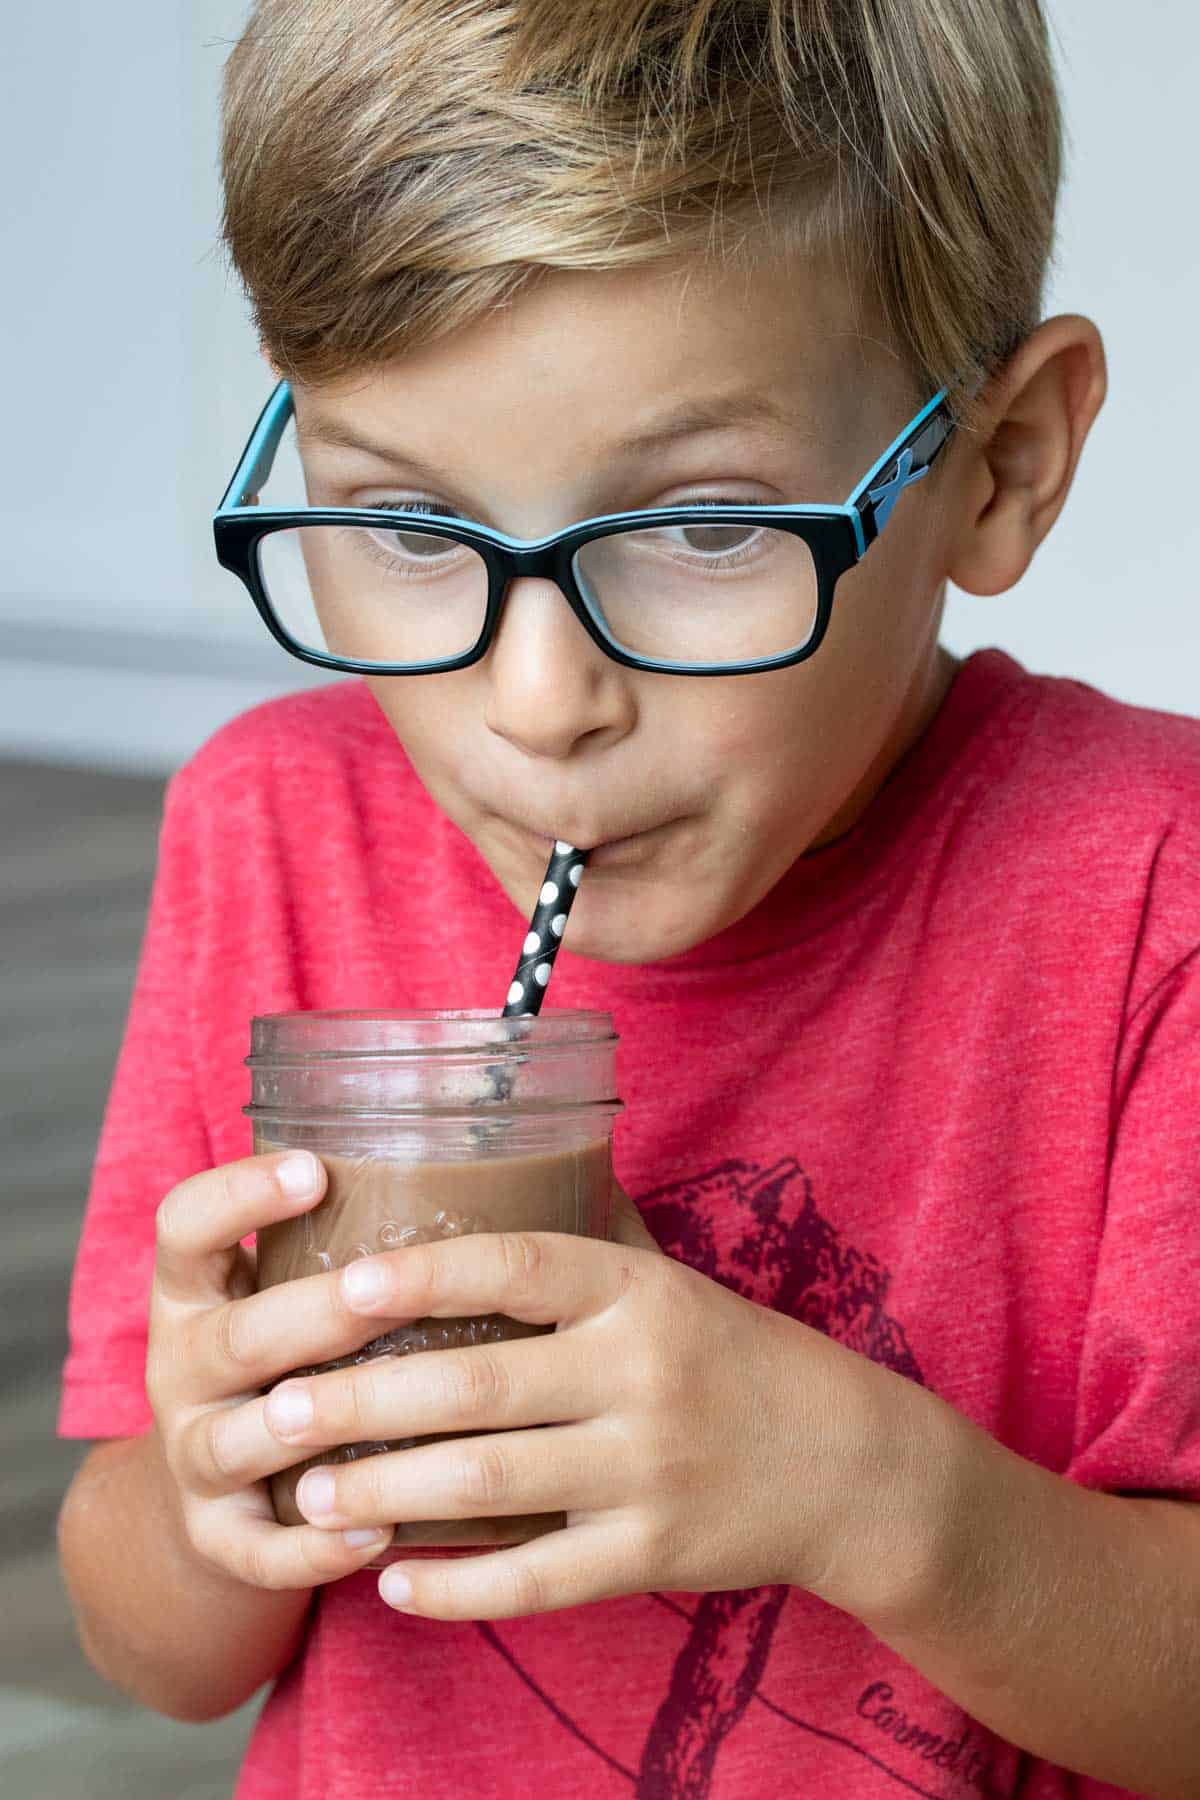 Boy holding a jar of chocolate milk and drinking it through a straw